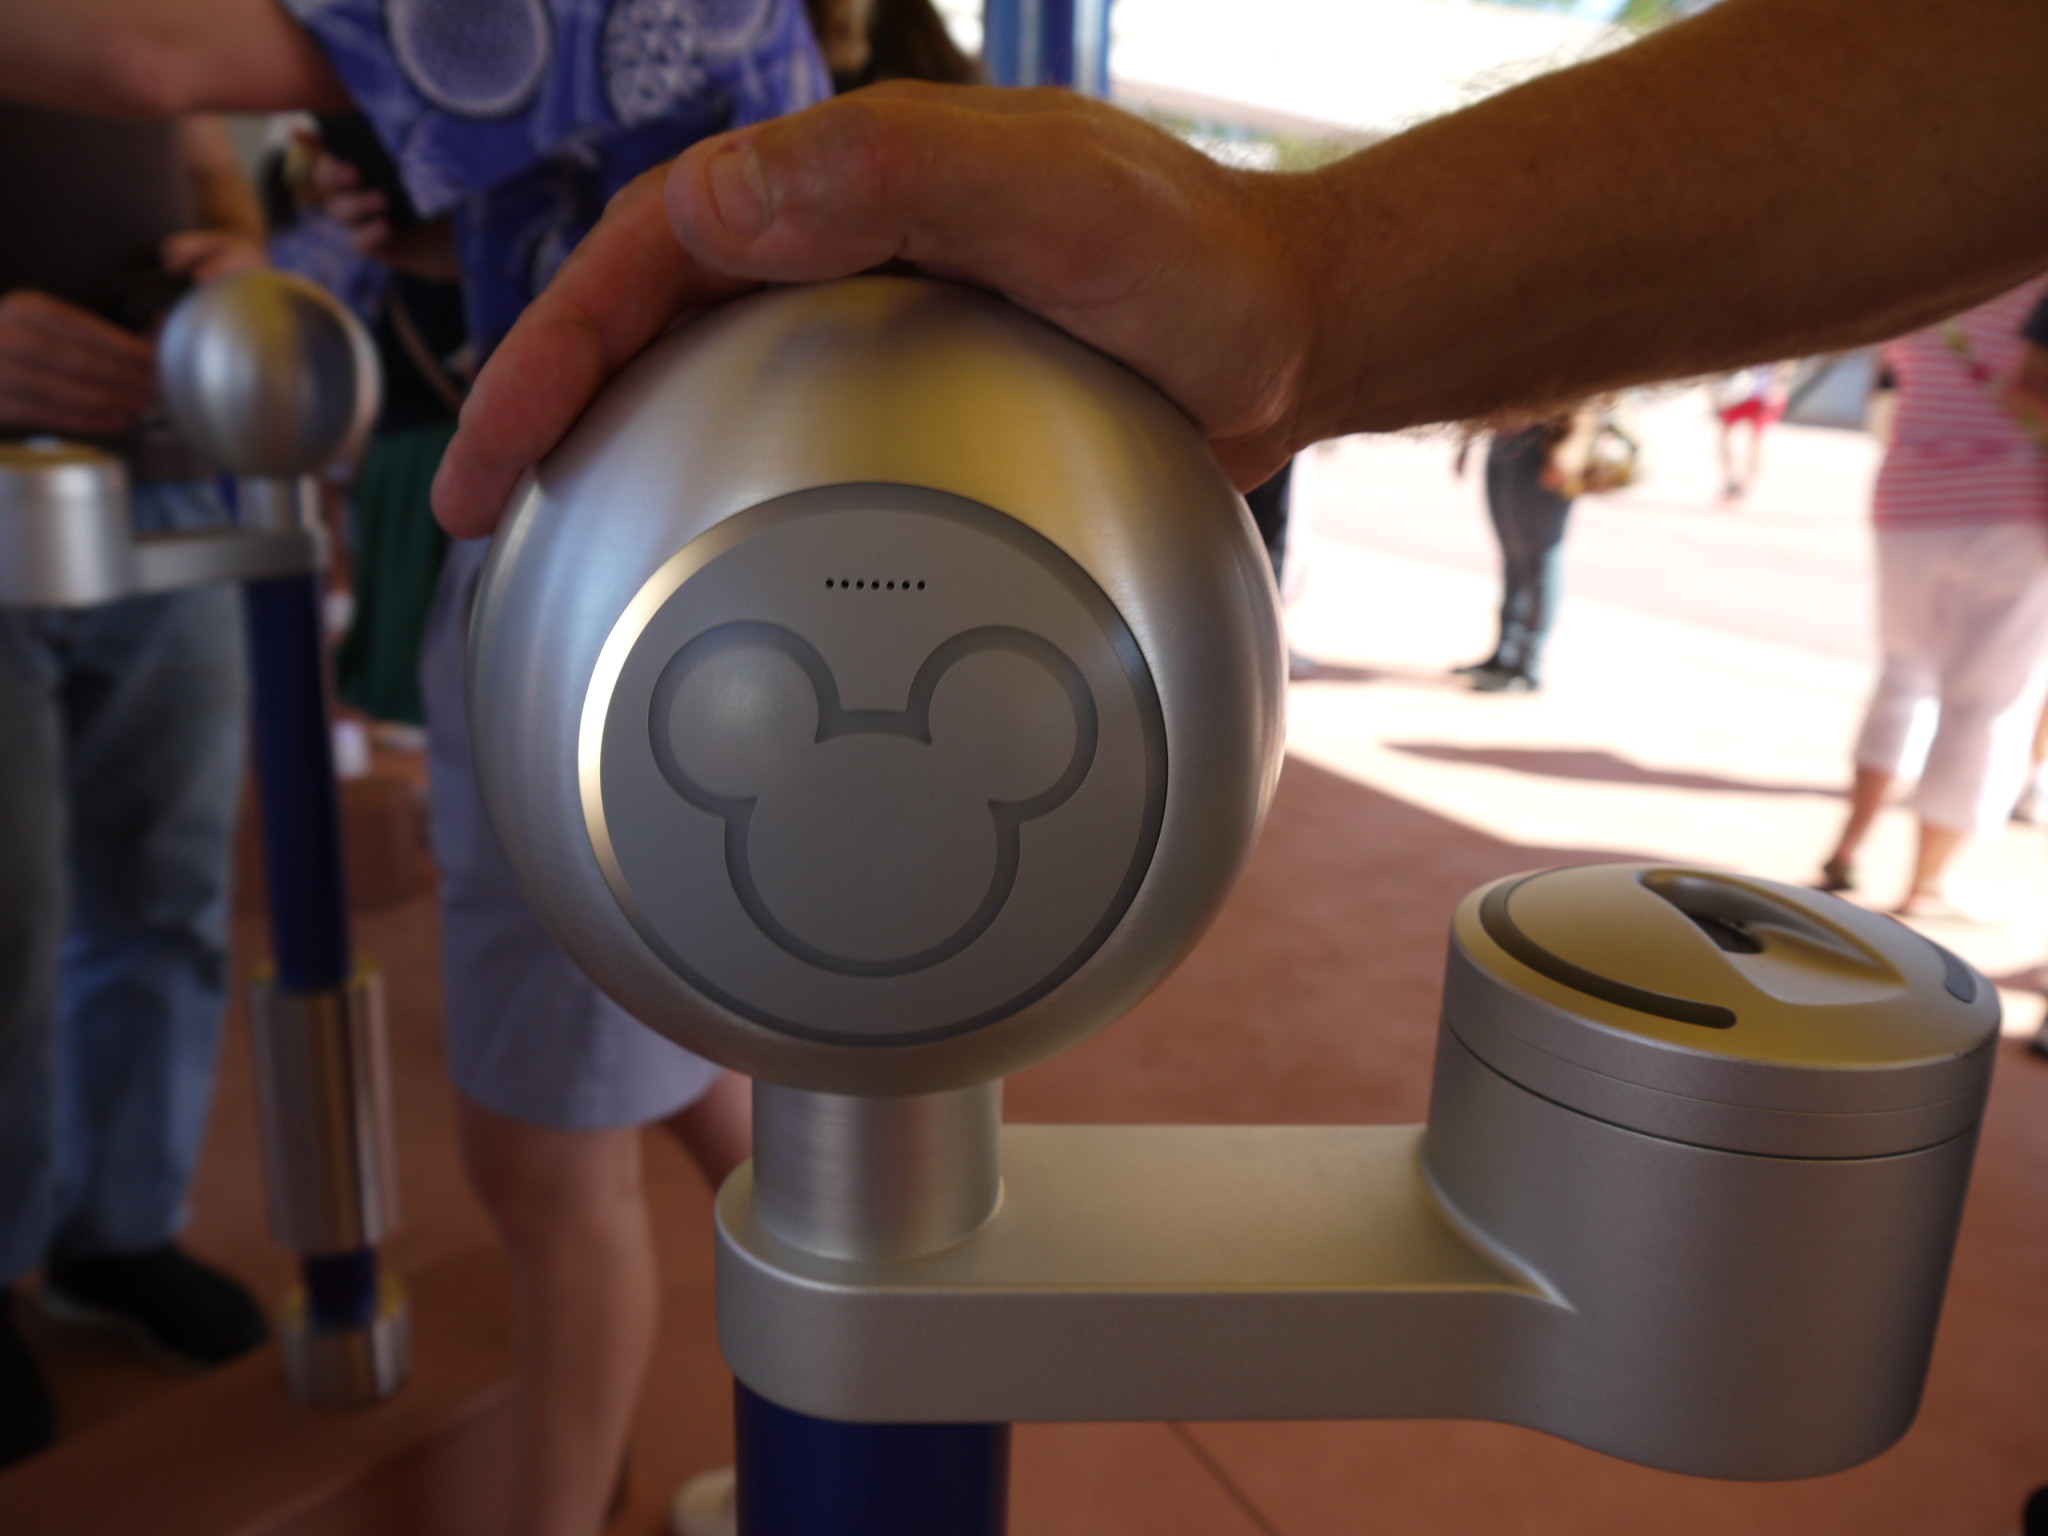 Hollywood Studios Testing Restrictions on Fastpass+